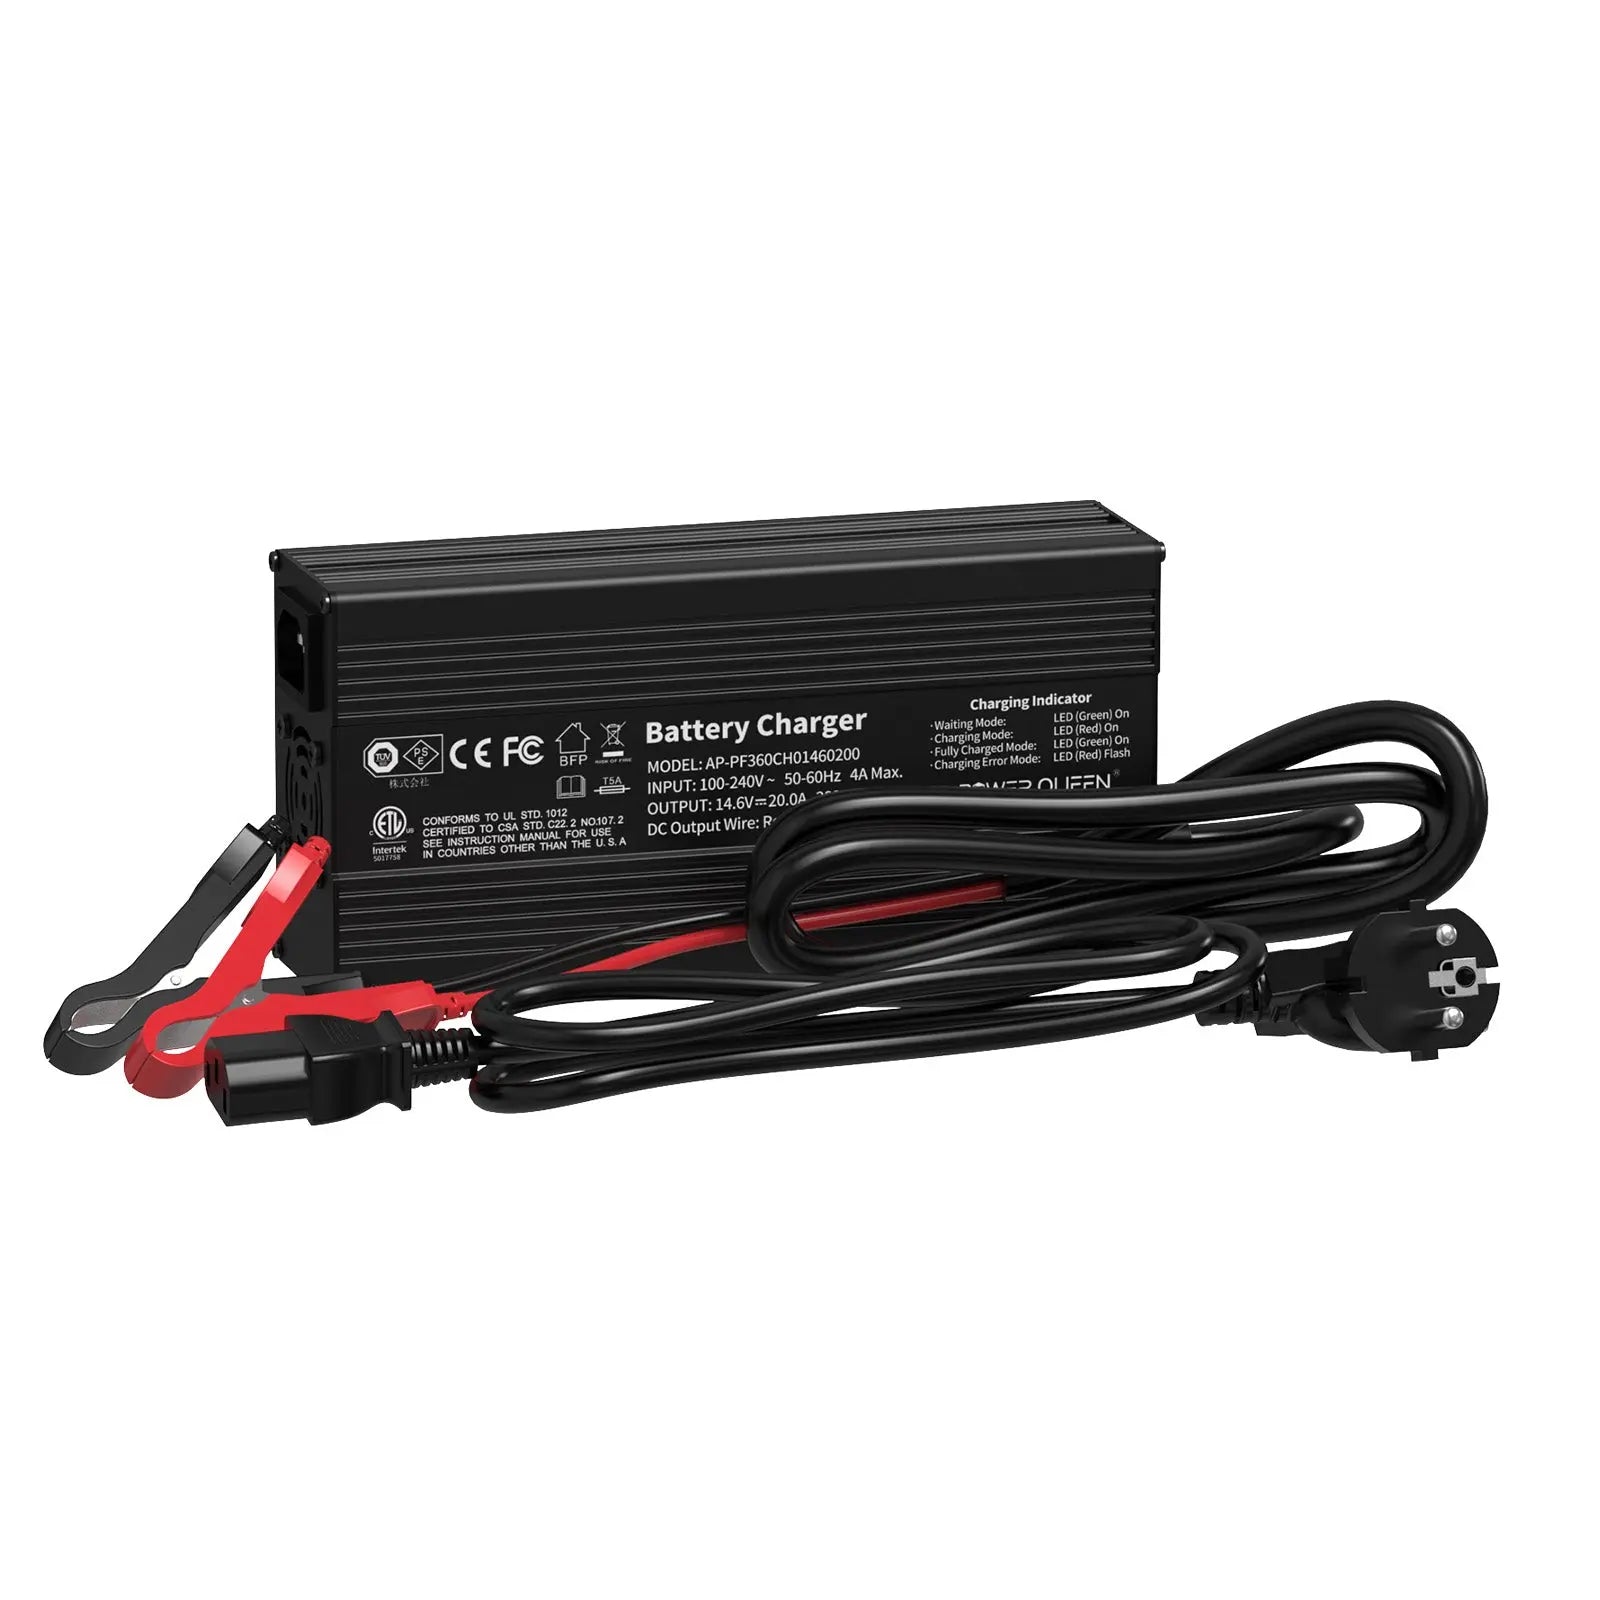 Power Queen 14.6V 20A LiFePO4 Battery Charger Power Queen